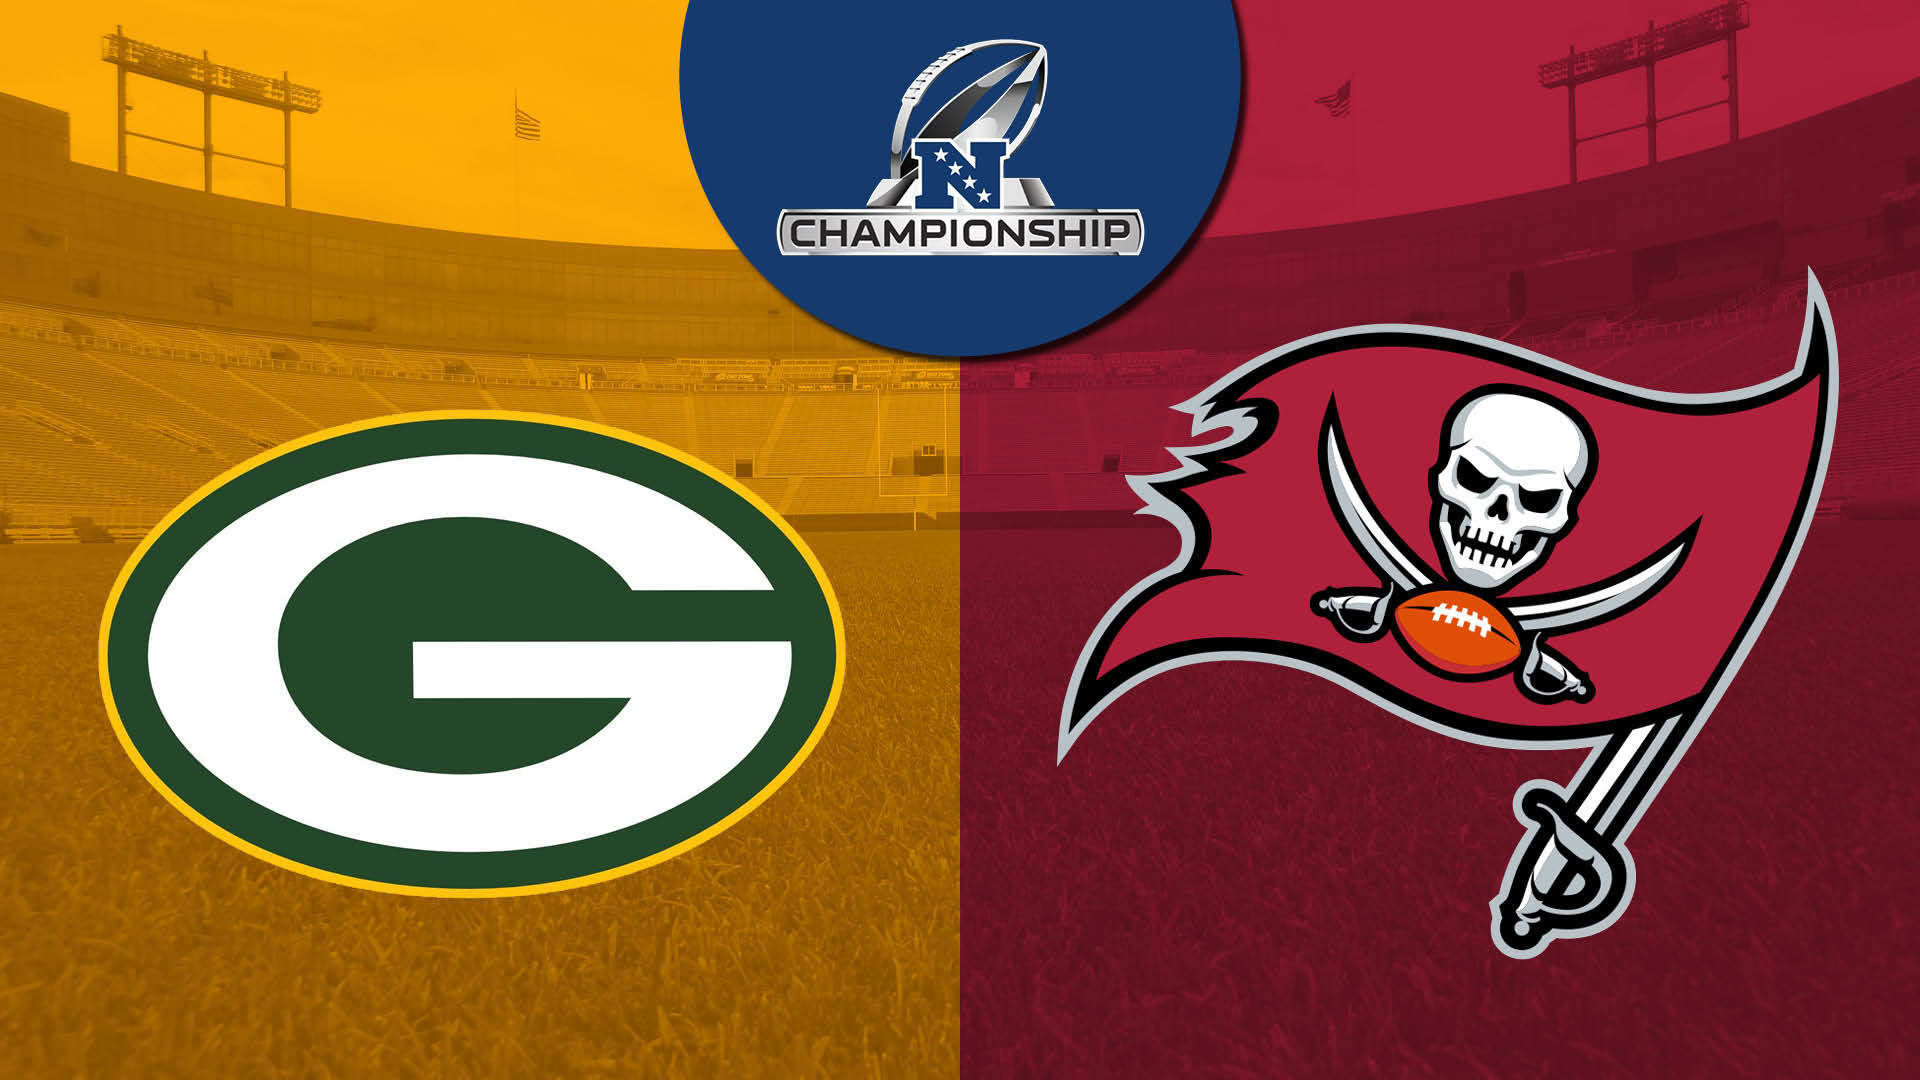 Green Bay Packers v. Bucs: Behind Enemy Lines - NFC Championship